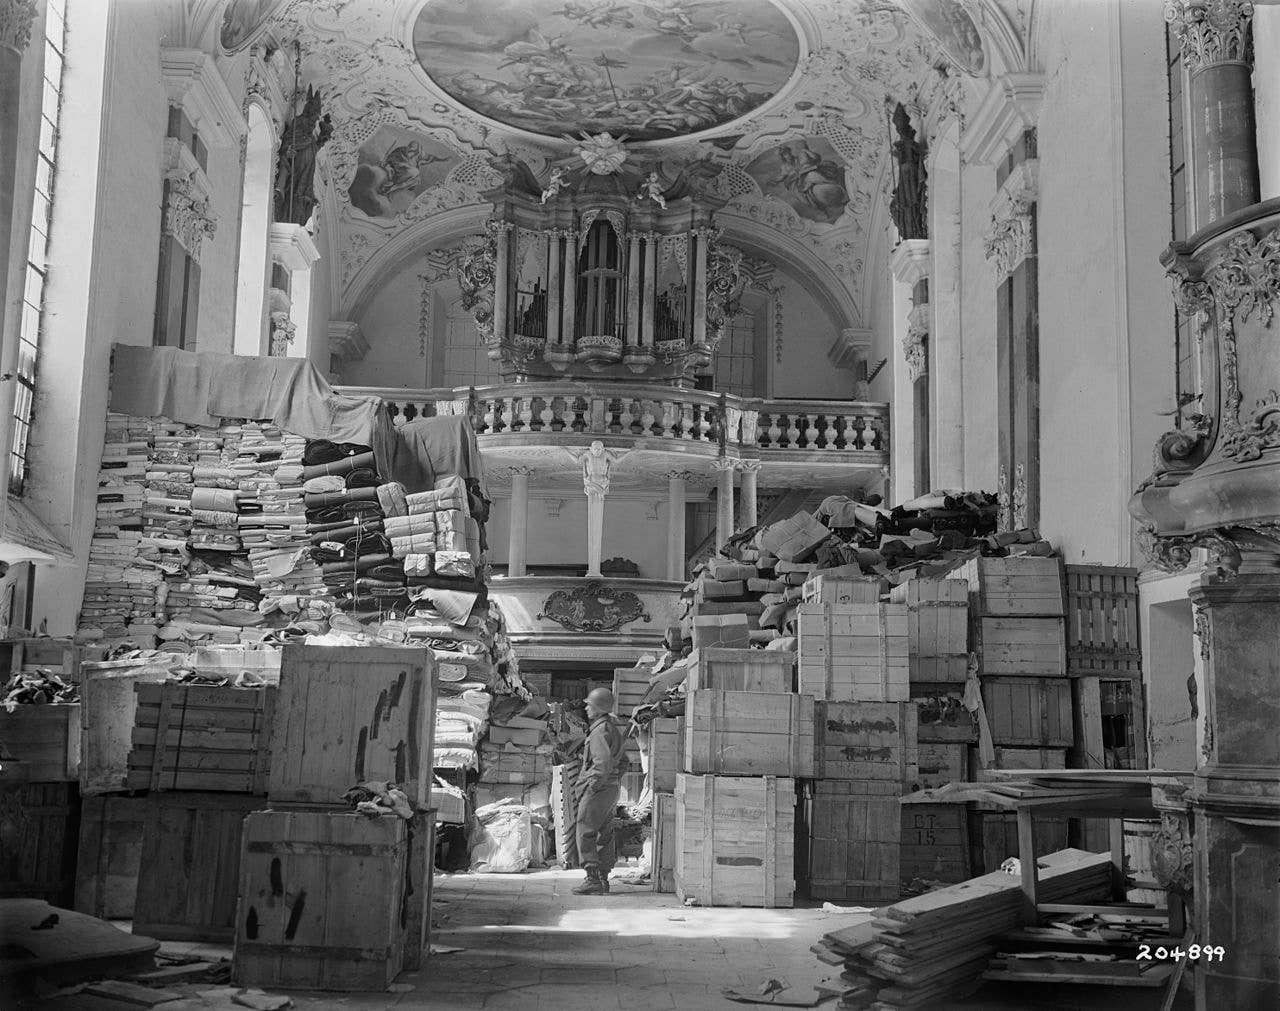 Art looted by the Nazis during World War II. (U.S. Army photo)